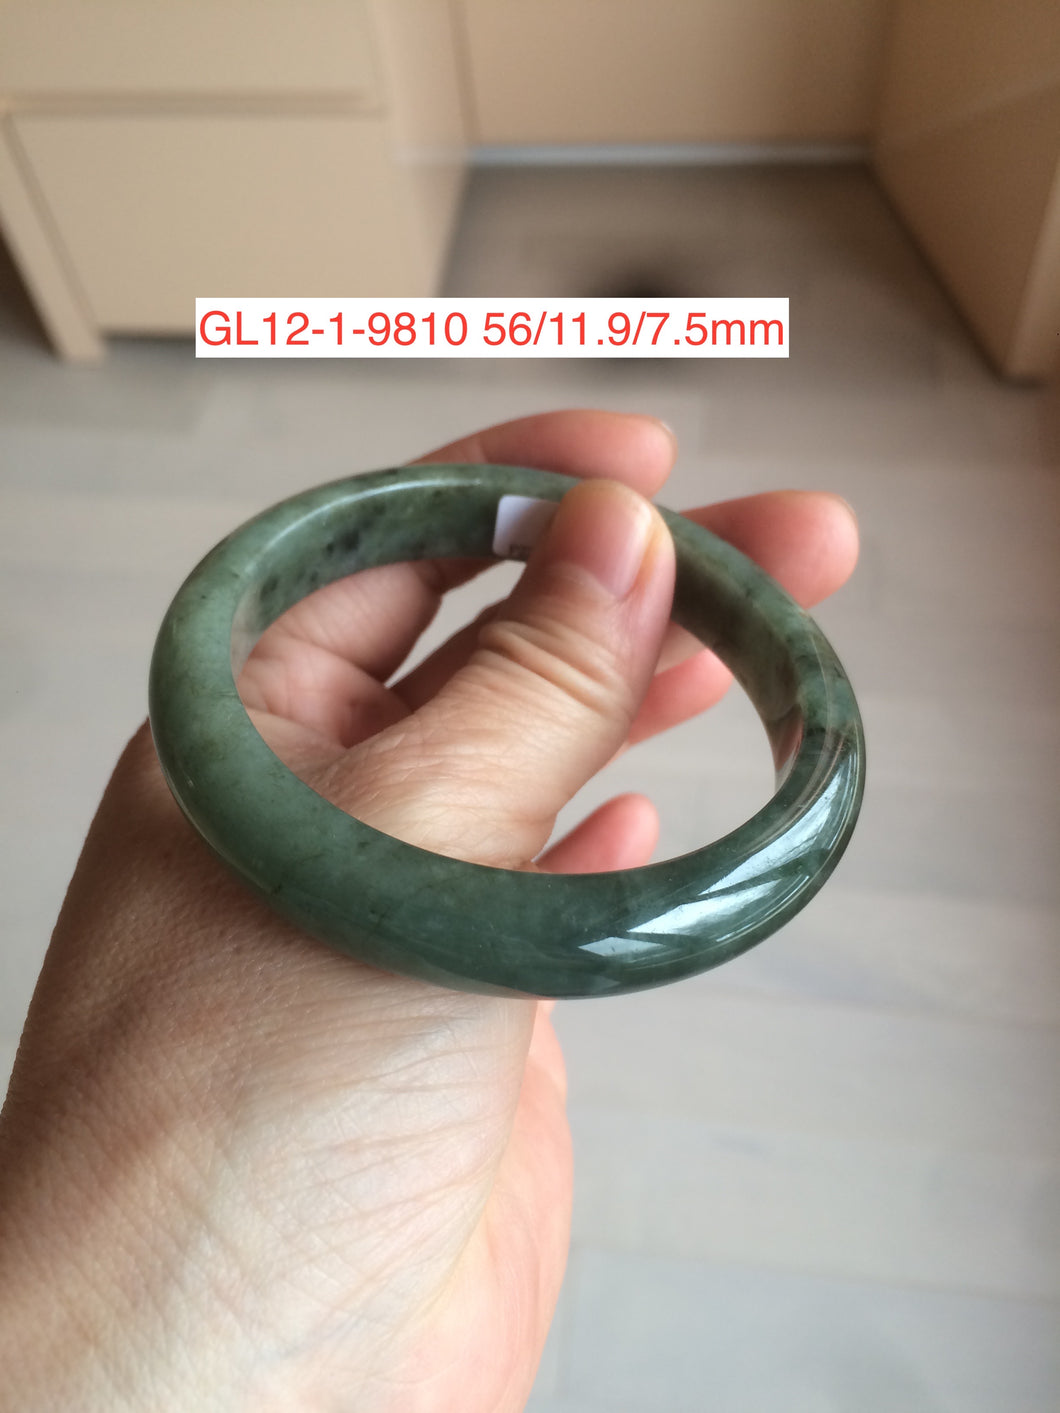 56-57mm Type A 100% Natural dark green/black Jadeite Jade bangle (with defects) group GL12